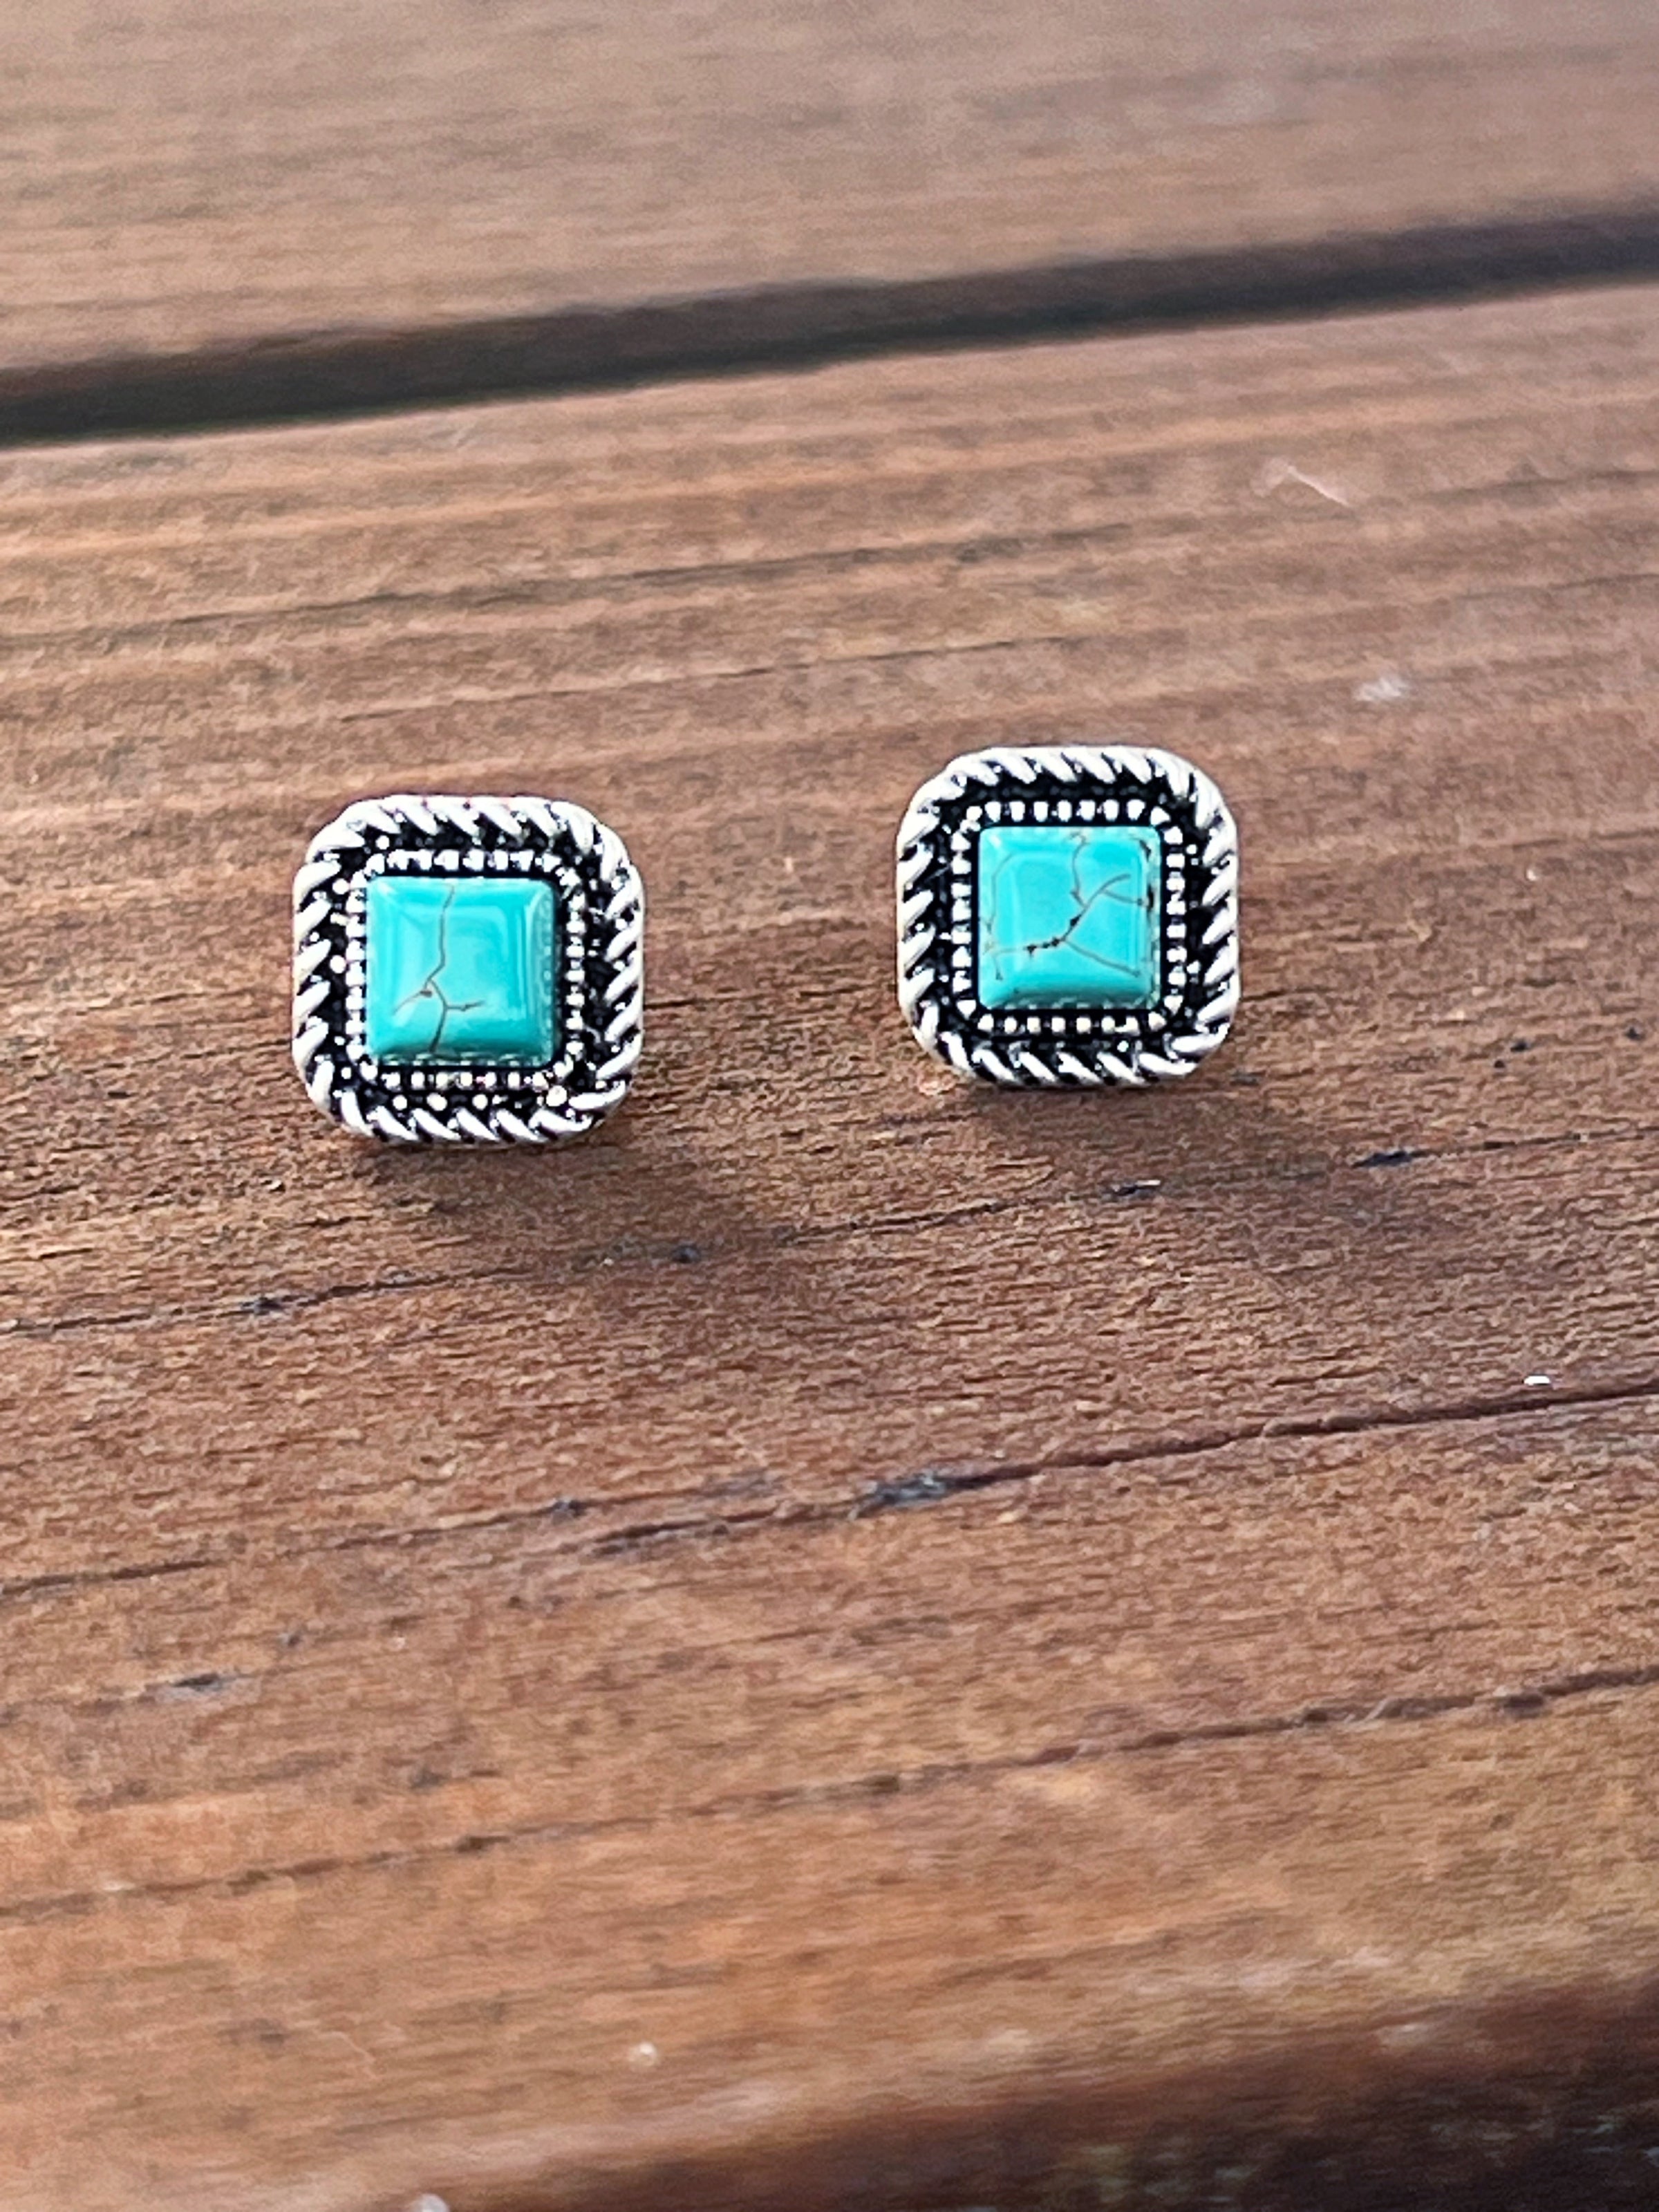 The Square Turquoise Stud Earring